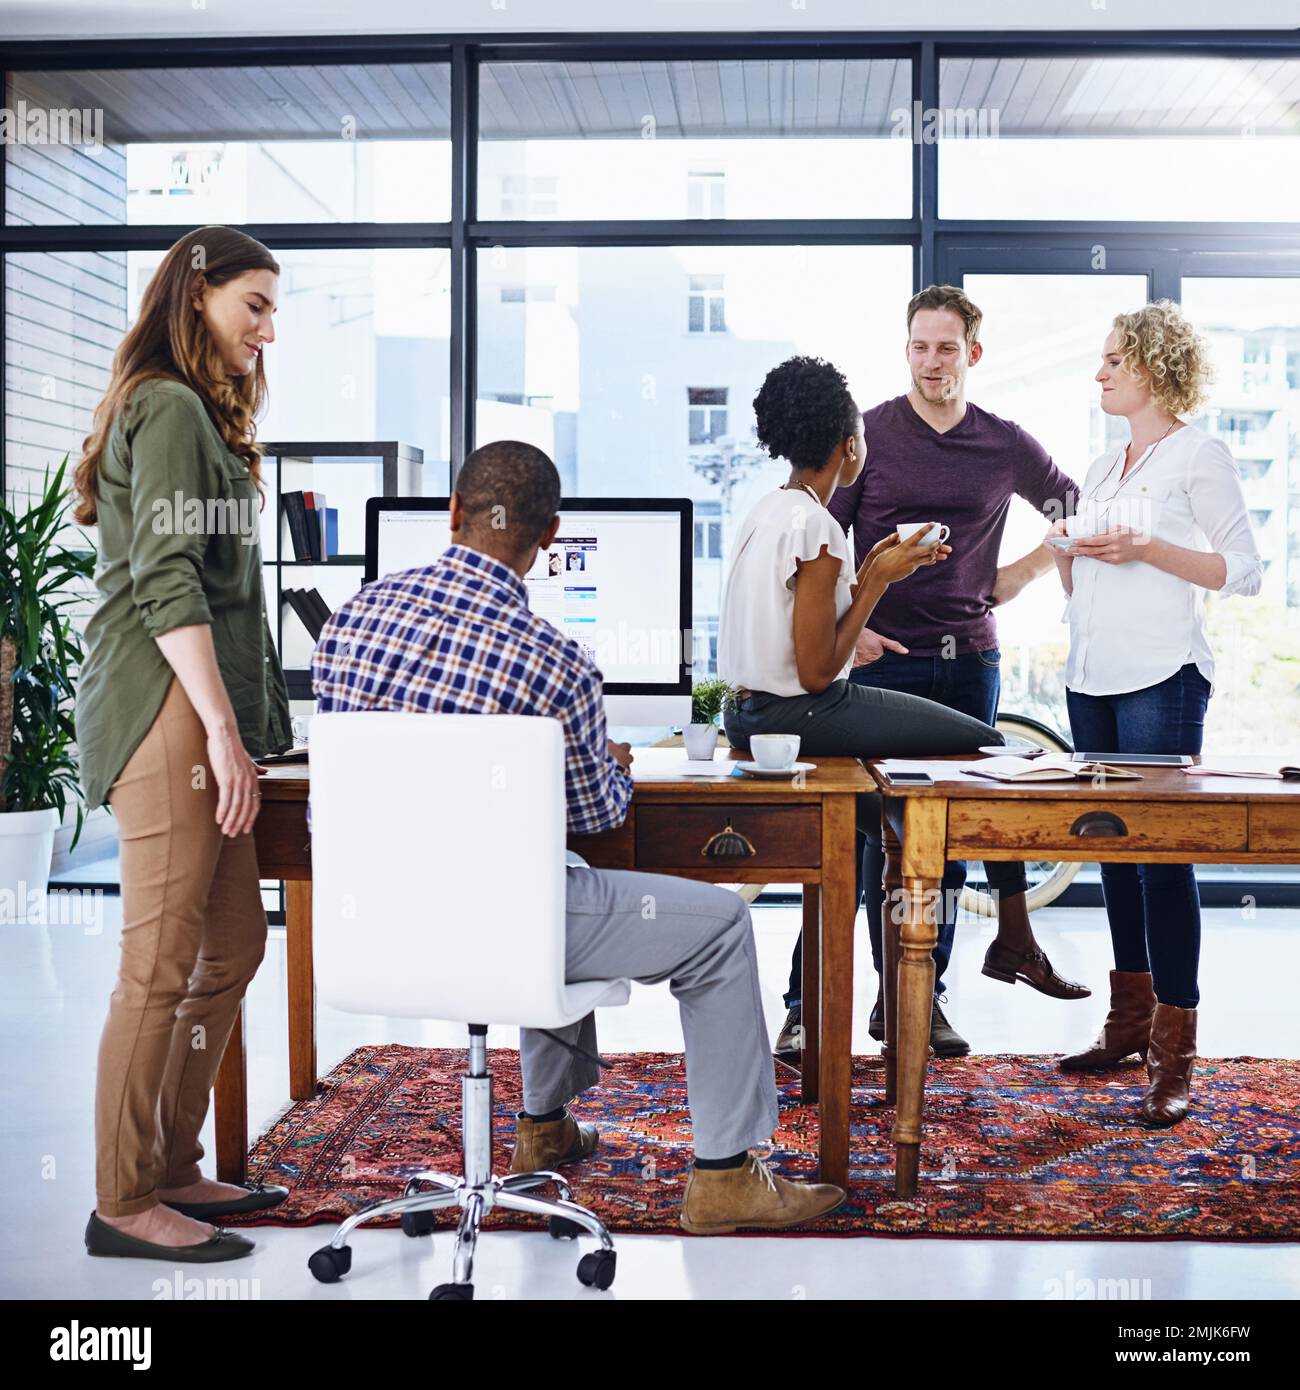 Theyve got the project covered. a team of designers working together in the office. Stock Photo